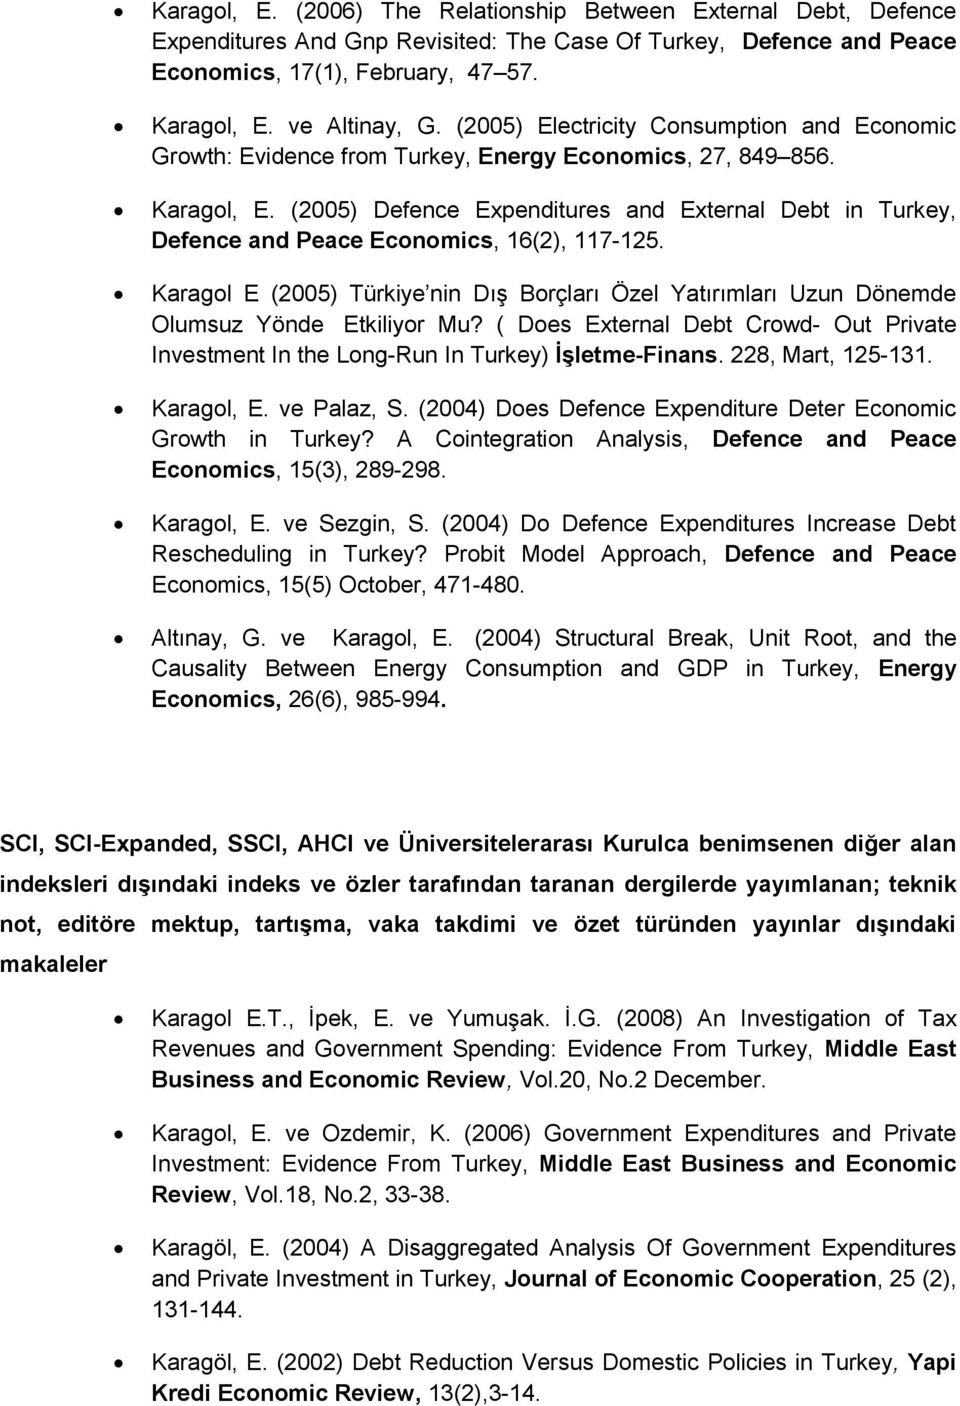 (2005) Defence Expenditures and External Debt in Turkey, Defence and Peace Economics, 16(2), 117-125.